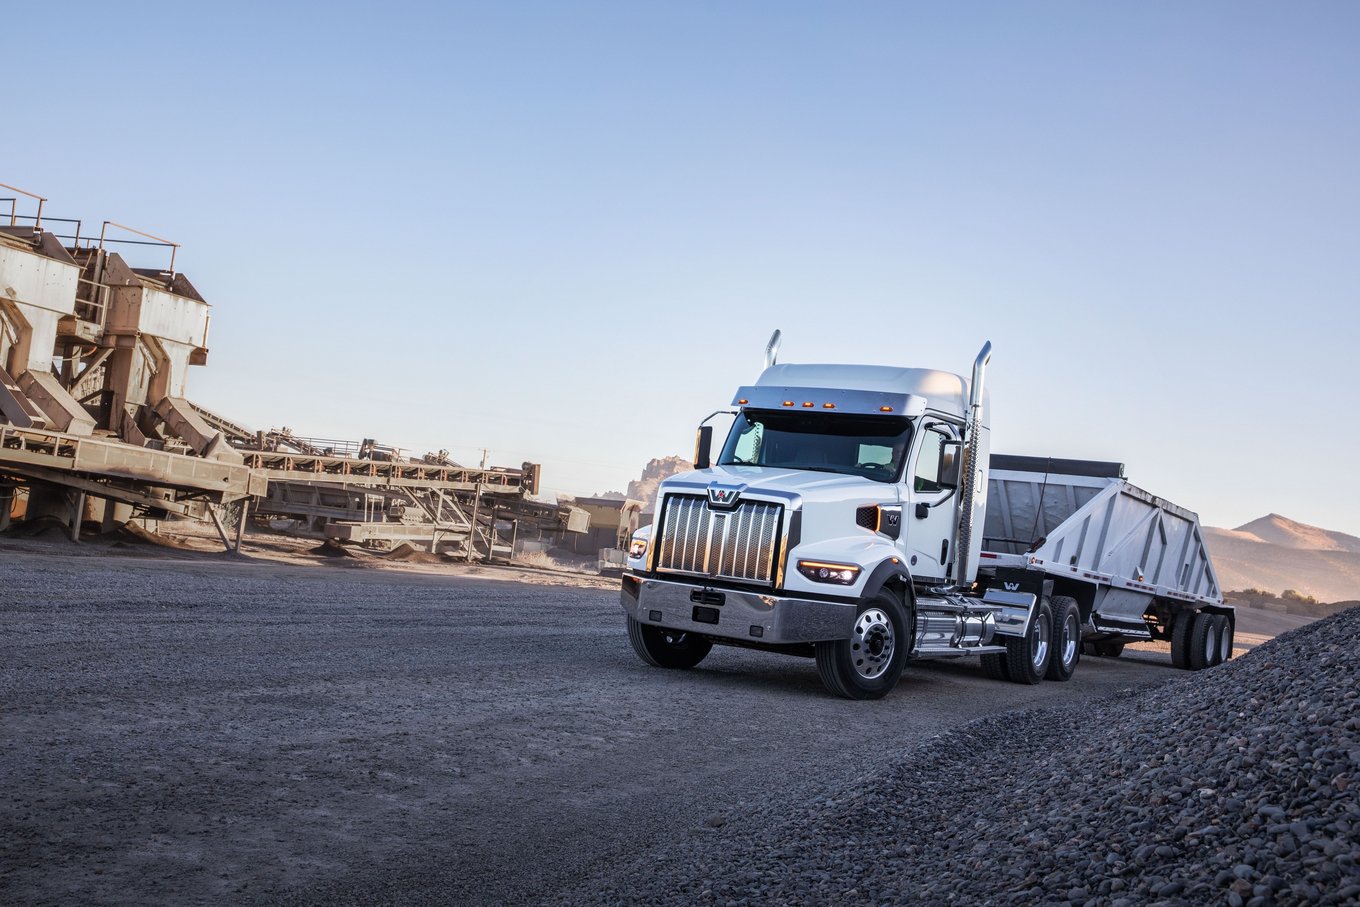 Western Star Trucks Recalled for Potential Rollaway Risk